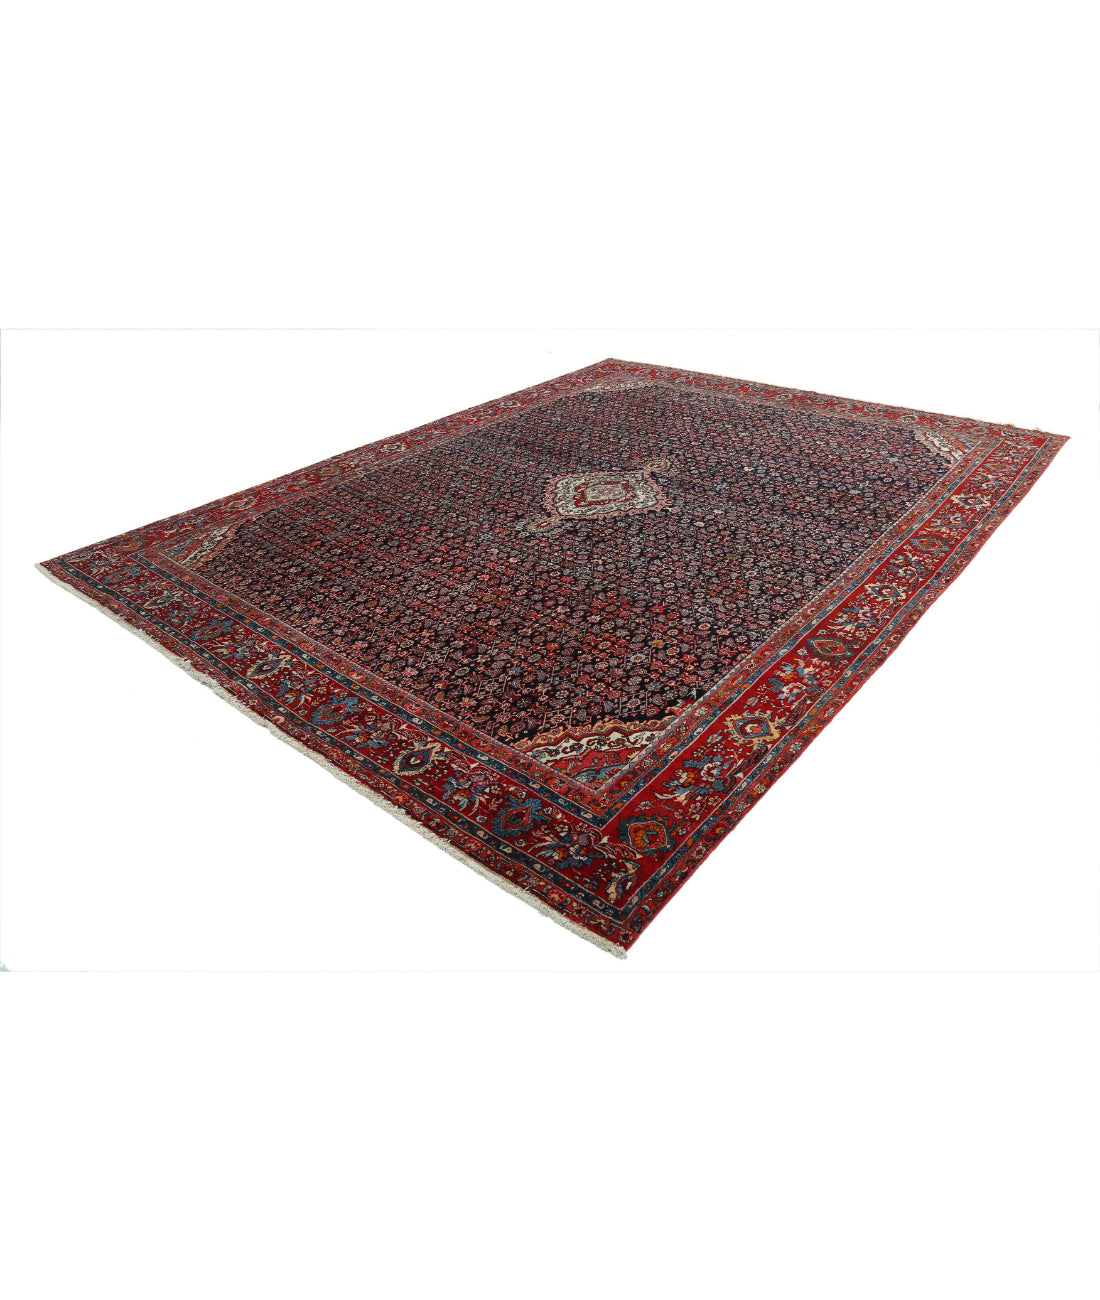 Hand Knotted Antique Persian Bijar Wool Rug - 10'0'' x 12'4'' 10'0'' x 12'4'' (300 X 370) / Blue / Red